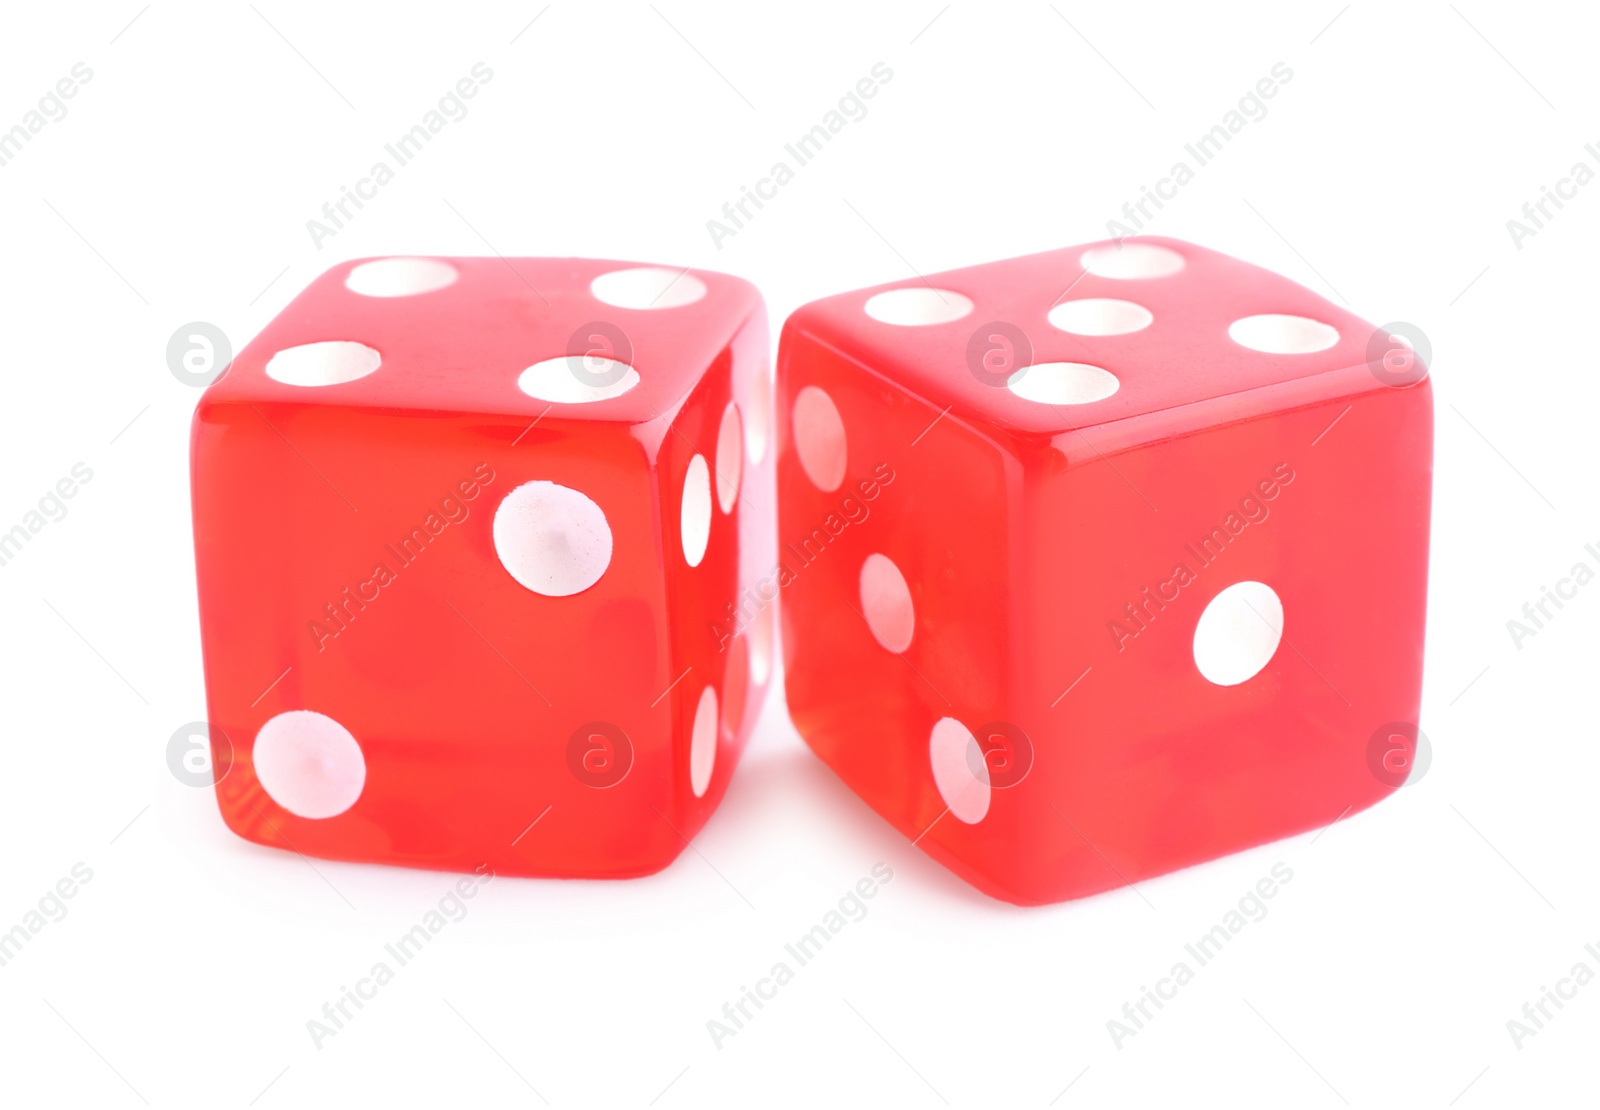 Photo of Two red game dices isolated on white